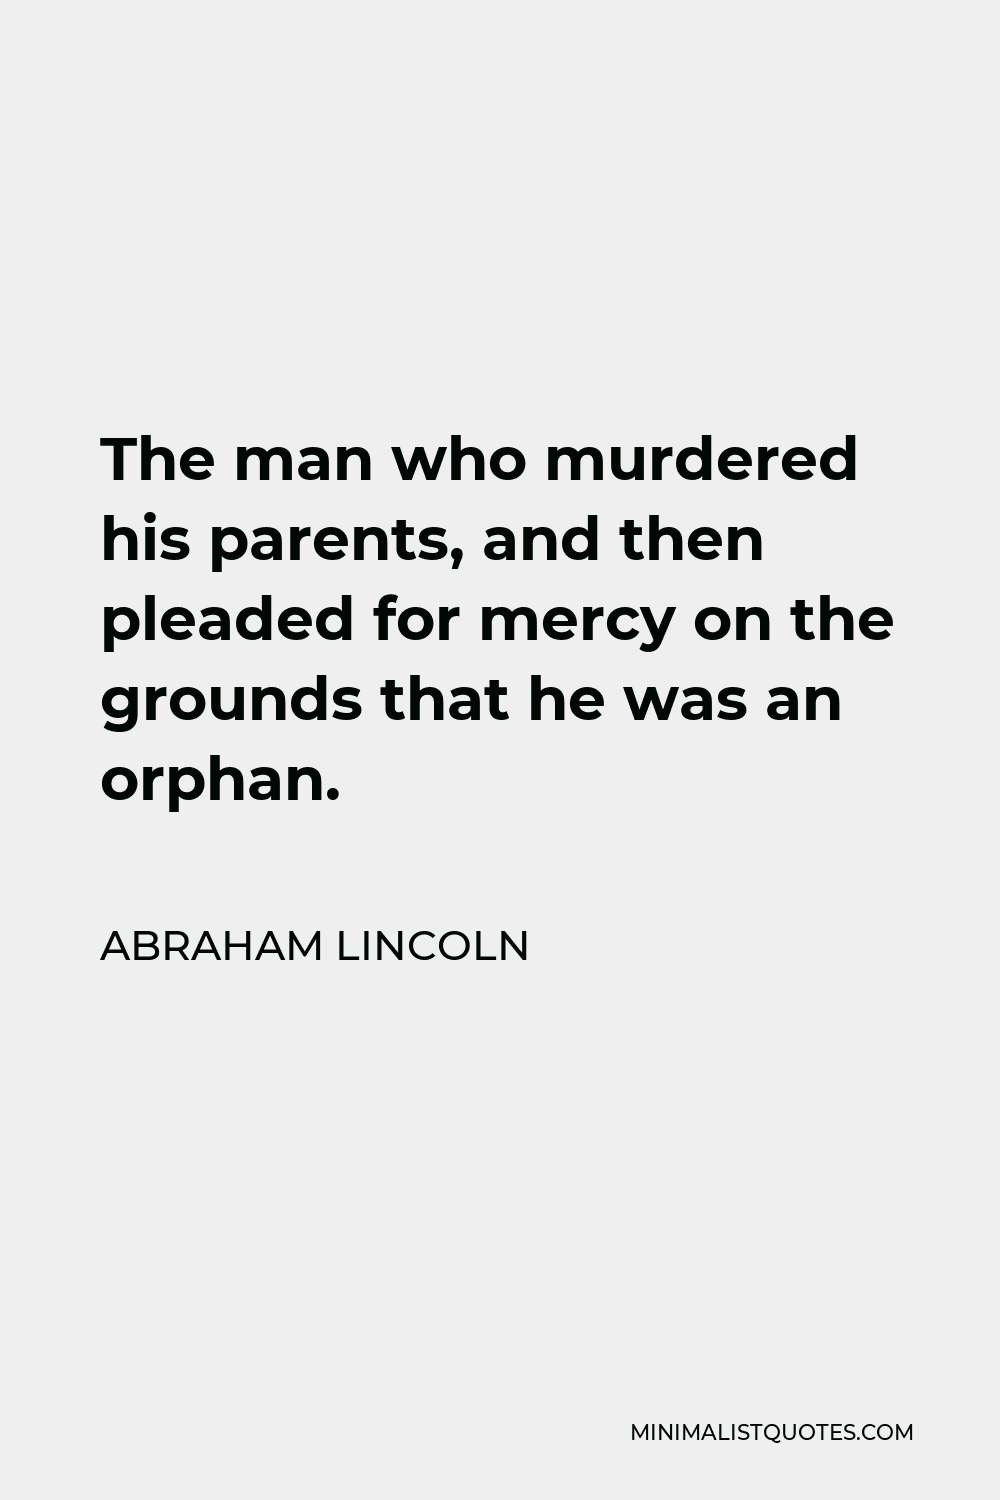 Abraham Lincoln Quote - The man who murdered his parents, and then pleaded for mercy on the grounds that he was an orphan.